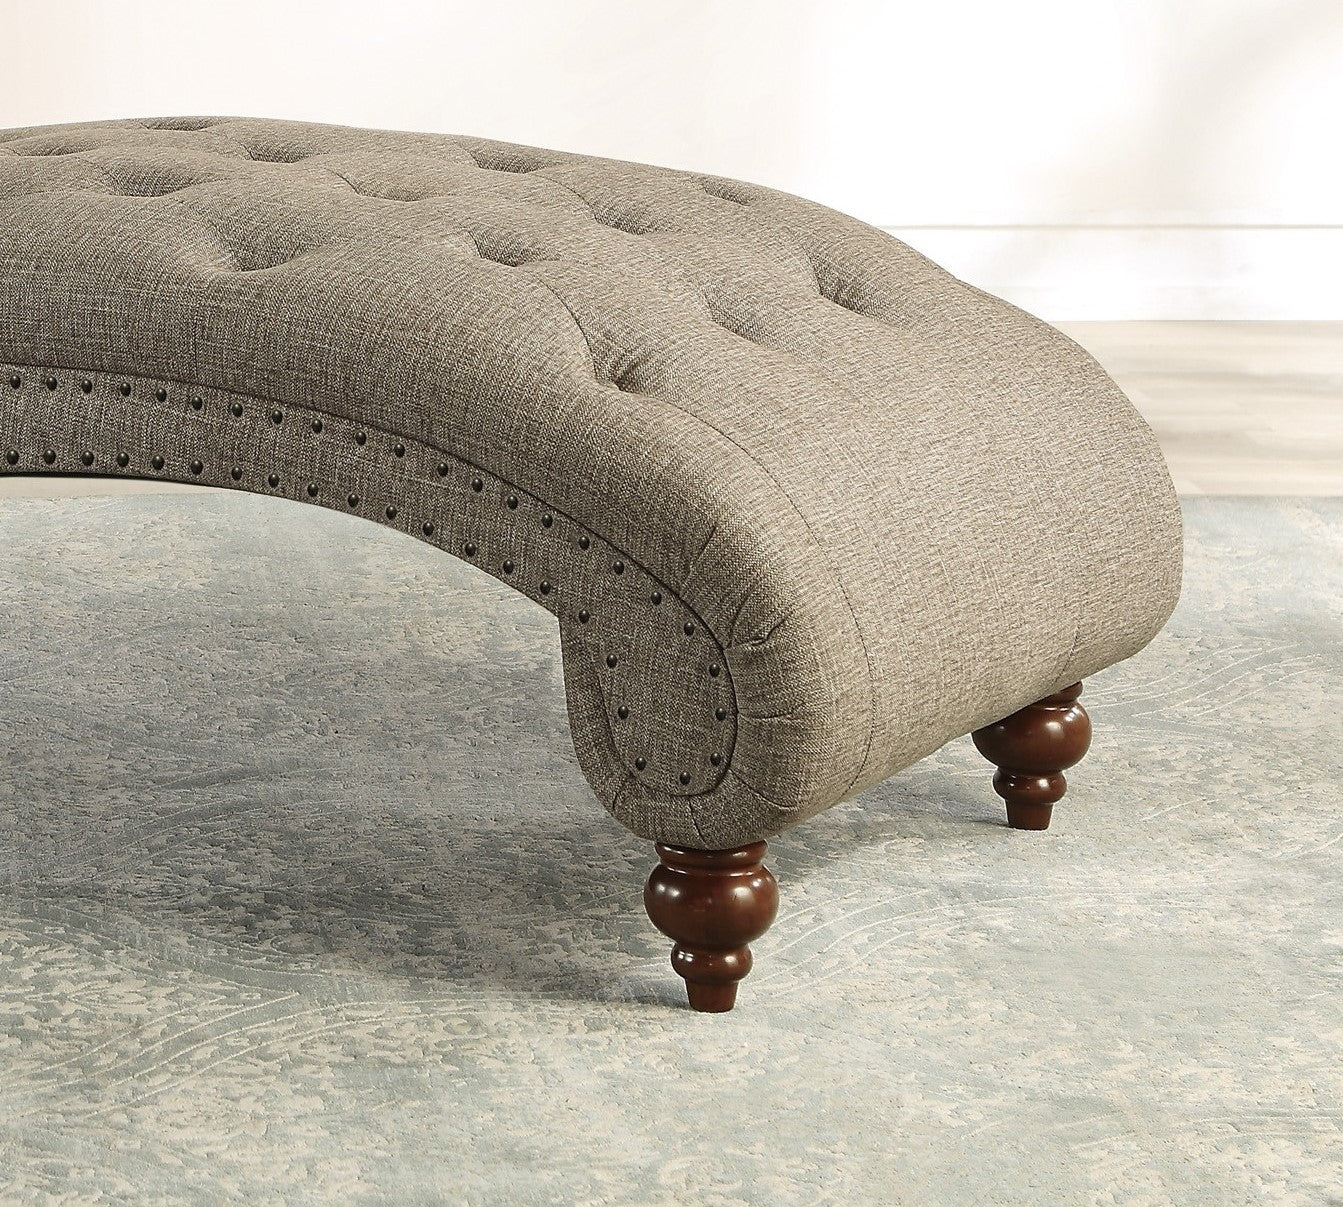 Modern Stylish Brown Color 1pc Chaise Button Tufted brown-primary living